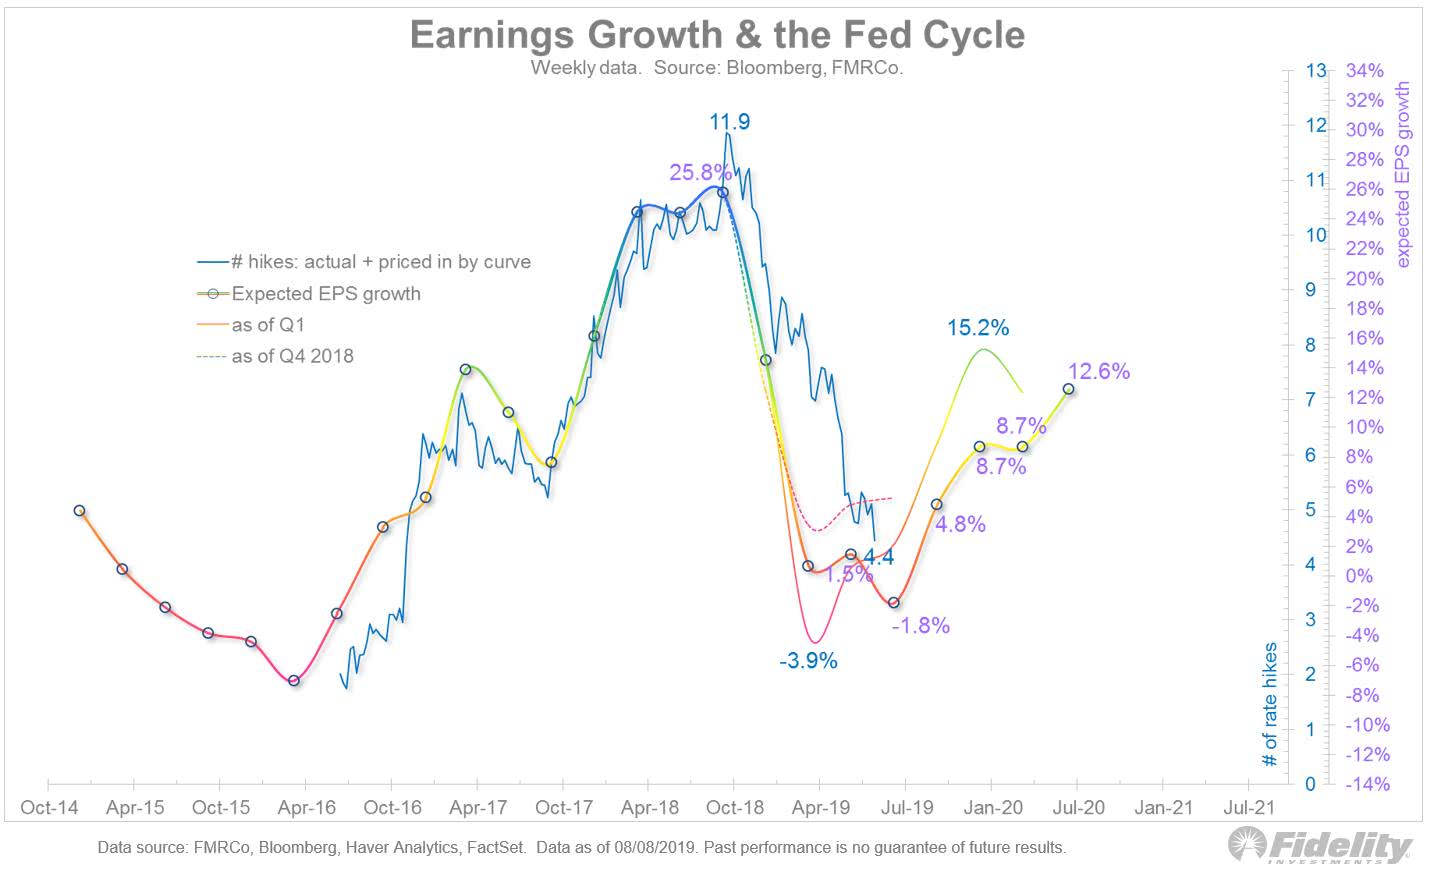 Earnings Growth and the Fed Cycle